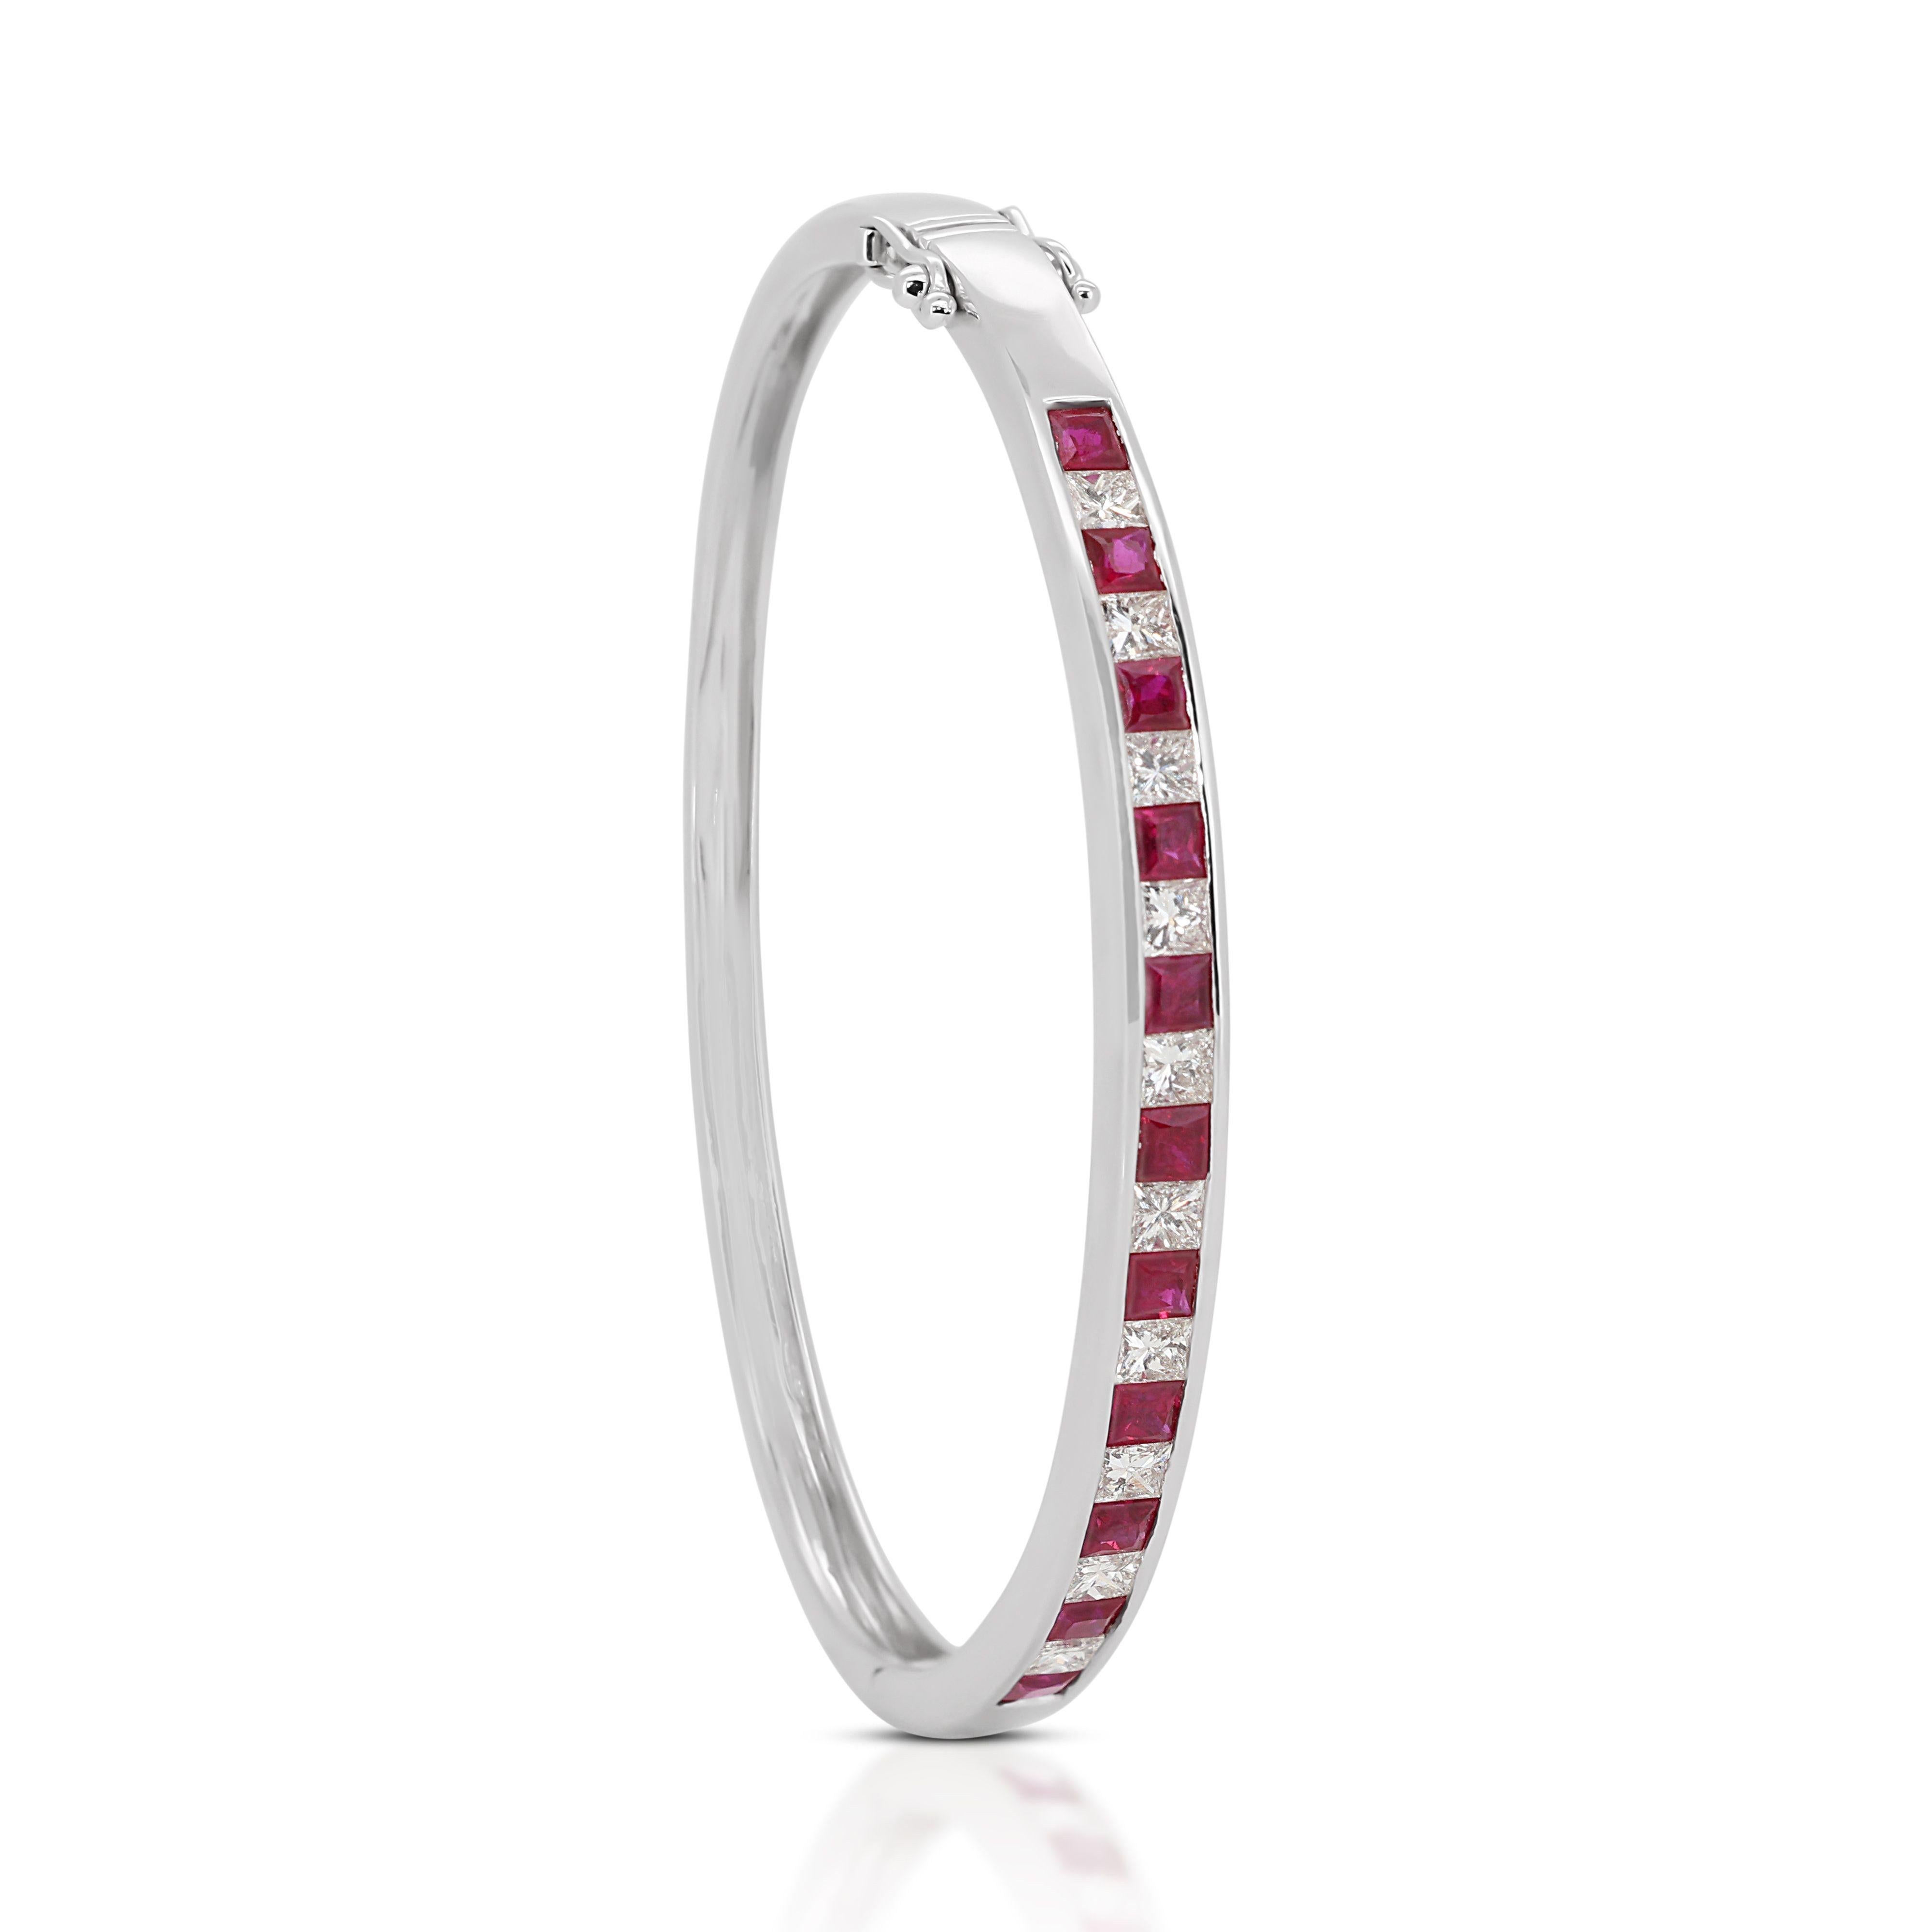 Dazzling 18k White Gold Bangle w/ 4ct Natural Rubies and Diamonds NGI Cert For Sale 2